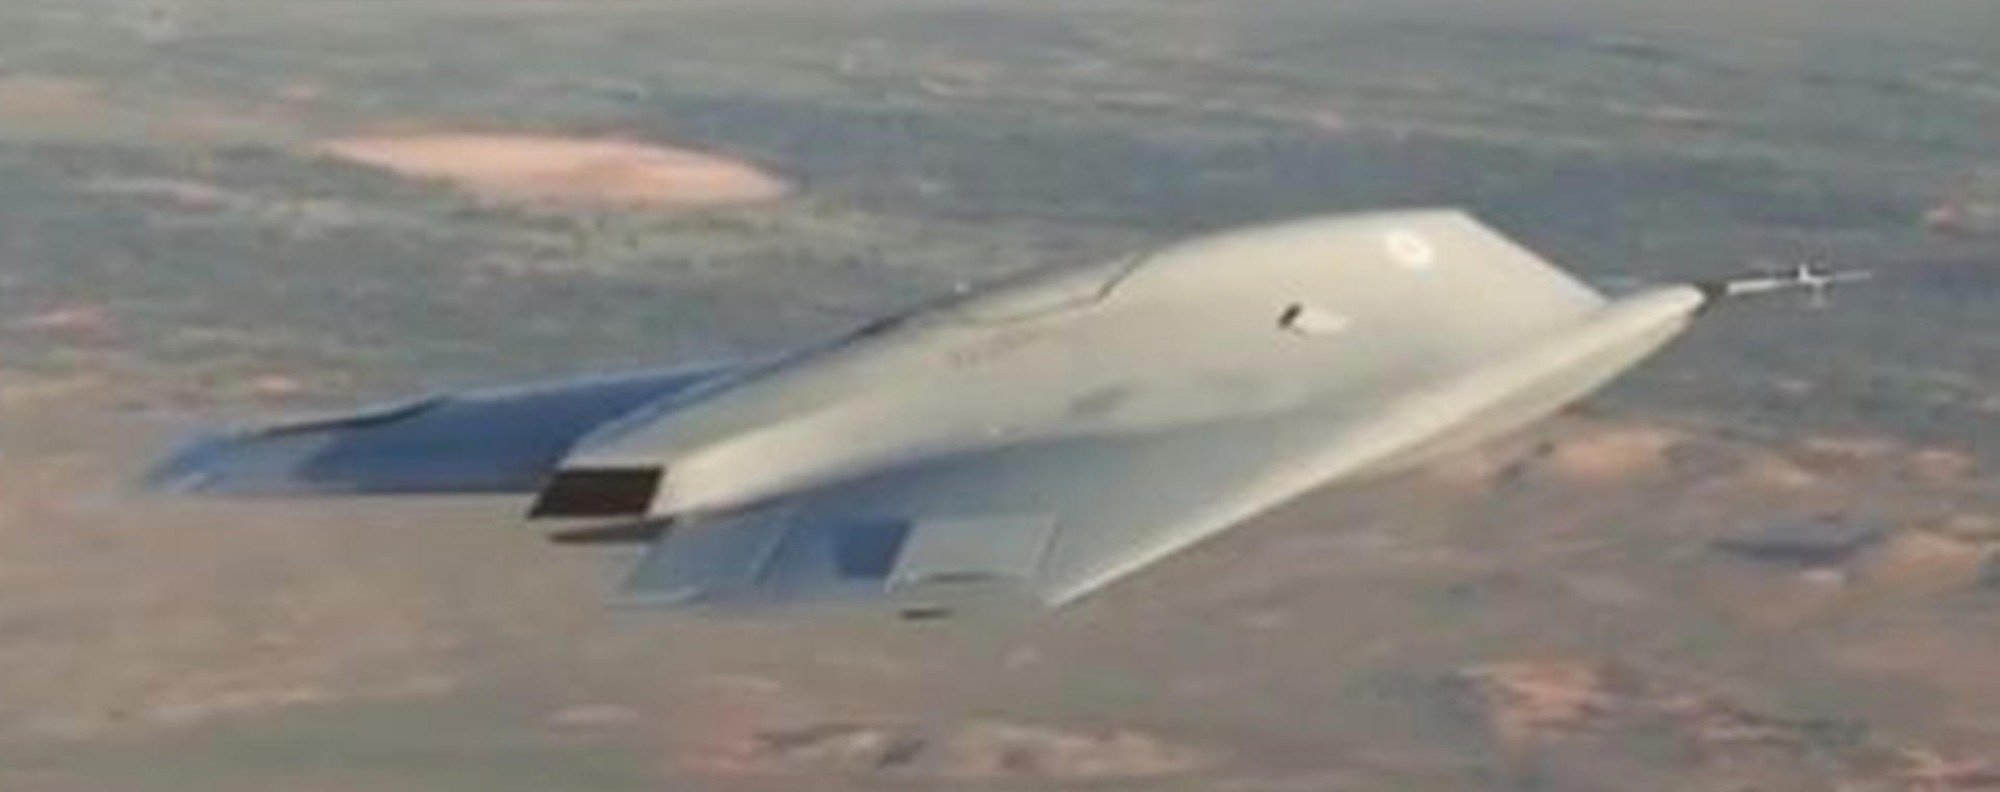 Taranis military drone in successful test | South Morning Post